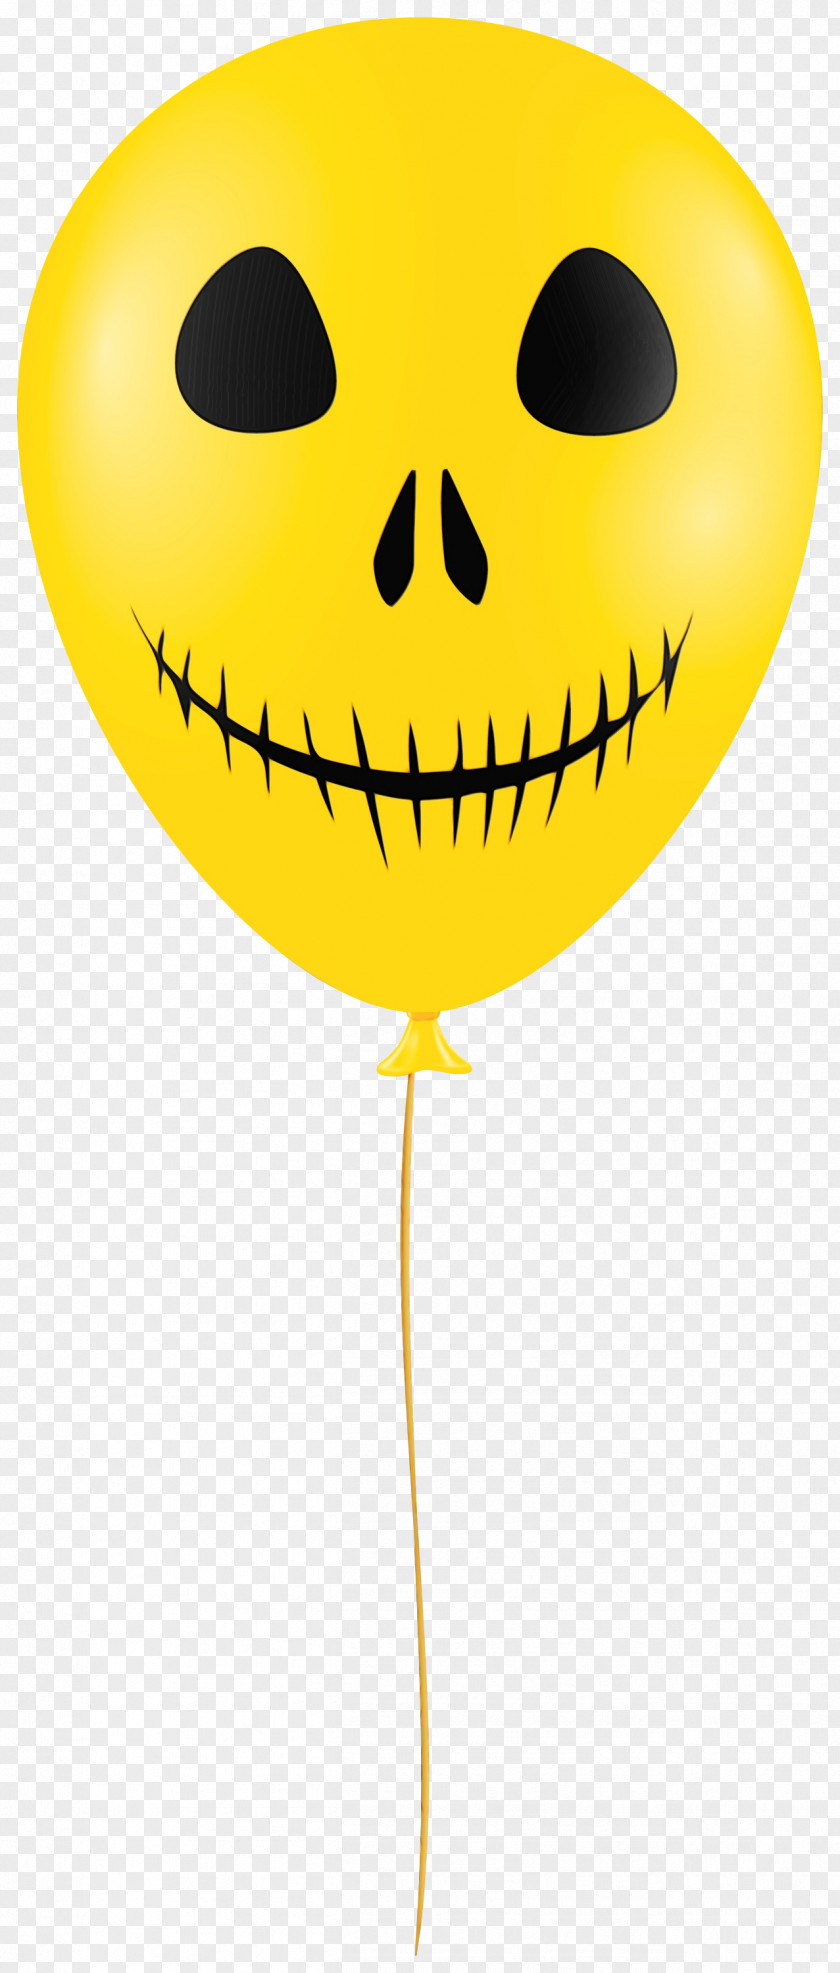 Balloon Halloween (5 Pieces) J&s Costume Birthday Silhouette PNG